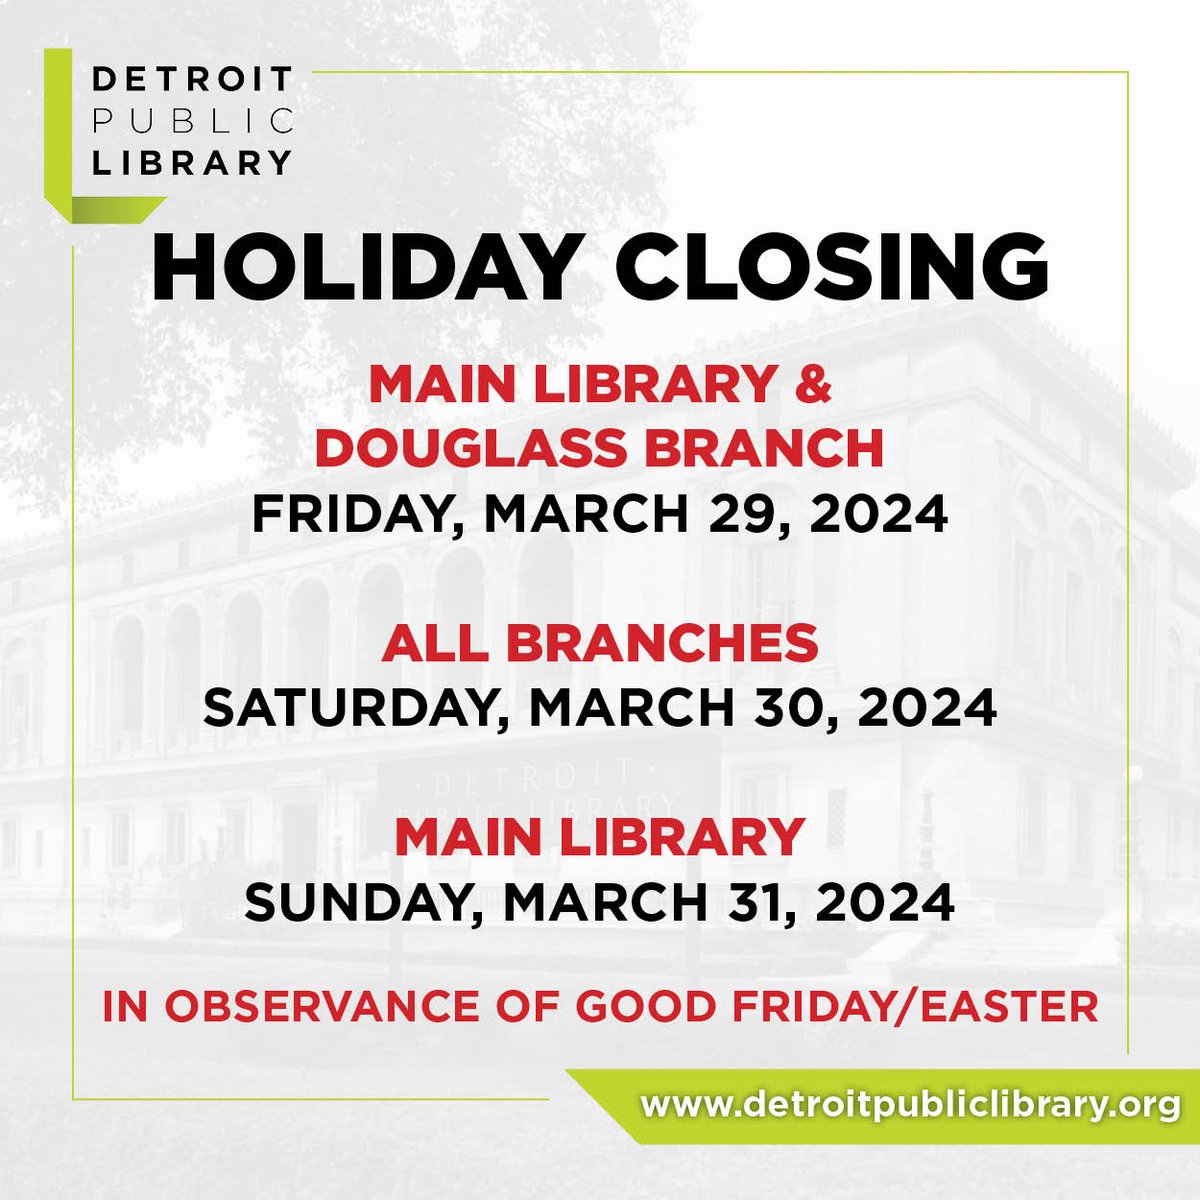 The #detroitpubliclibrary Holiday Closing in observance of Good Friday and Easter: Friday, March 29: Main Library and Douglass Branch Saturday, March 30: All Branches Sunday, March 31: Main Library